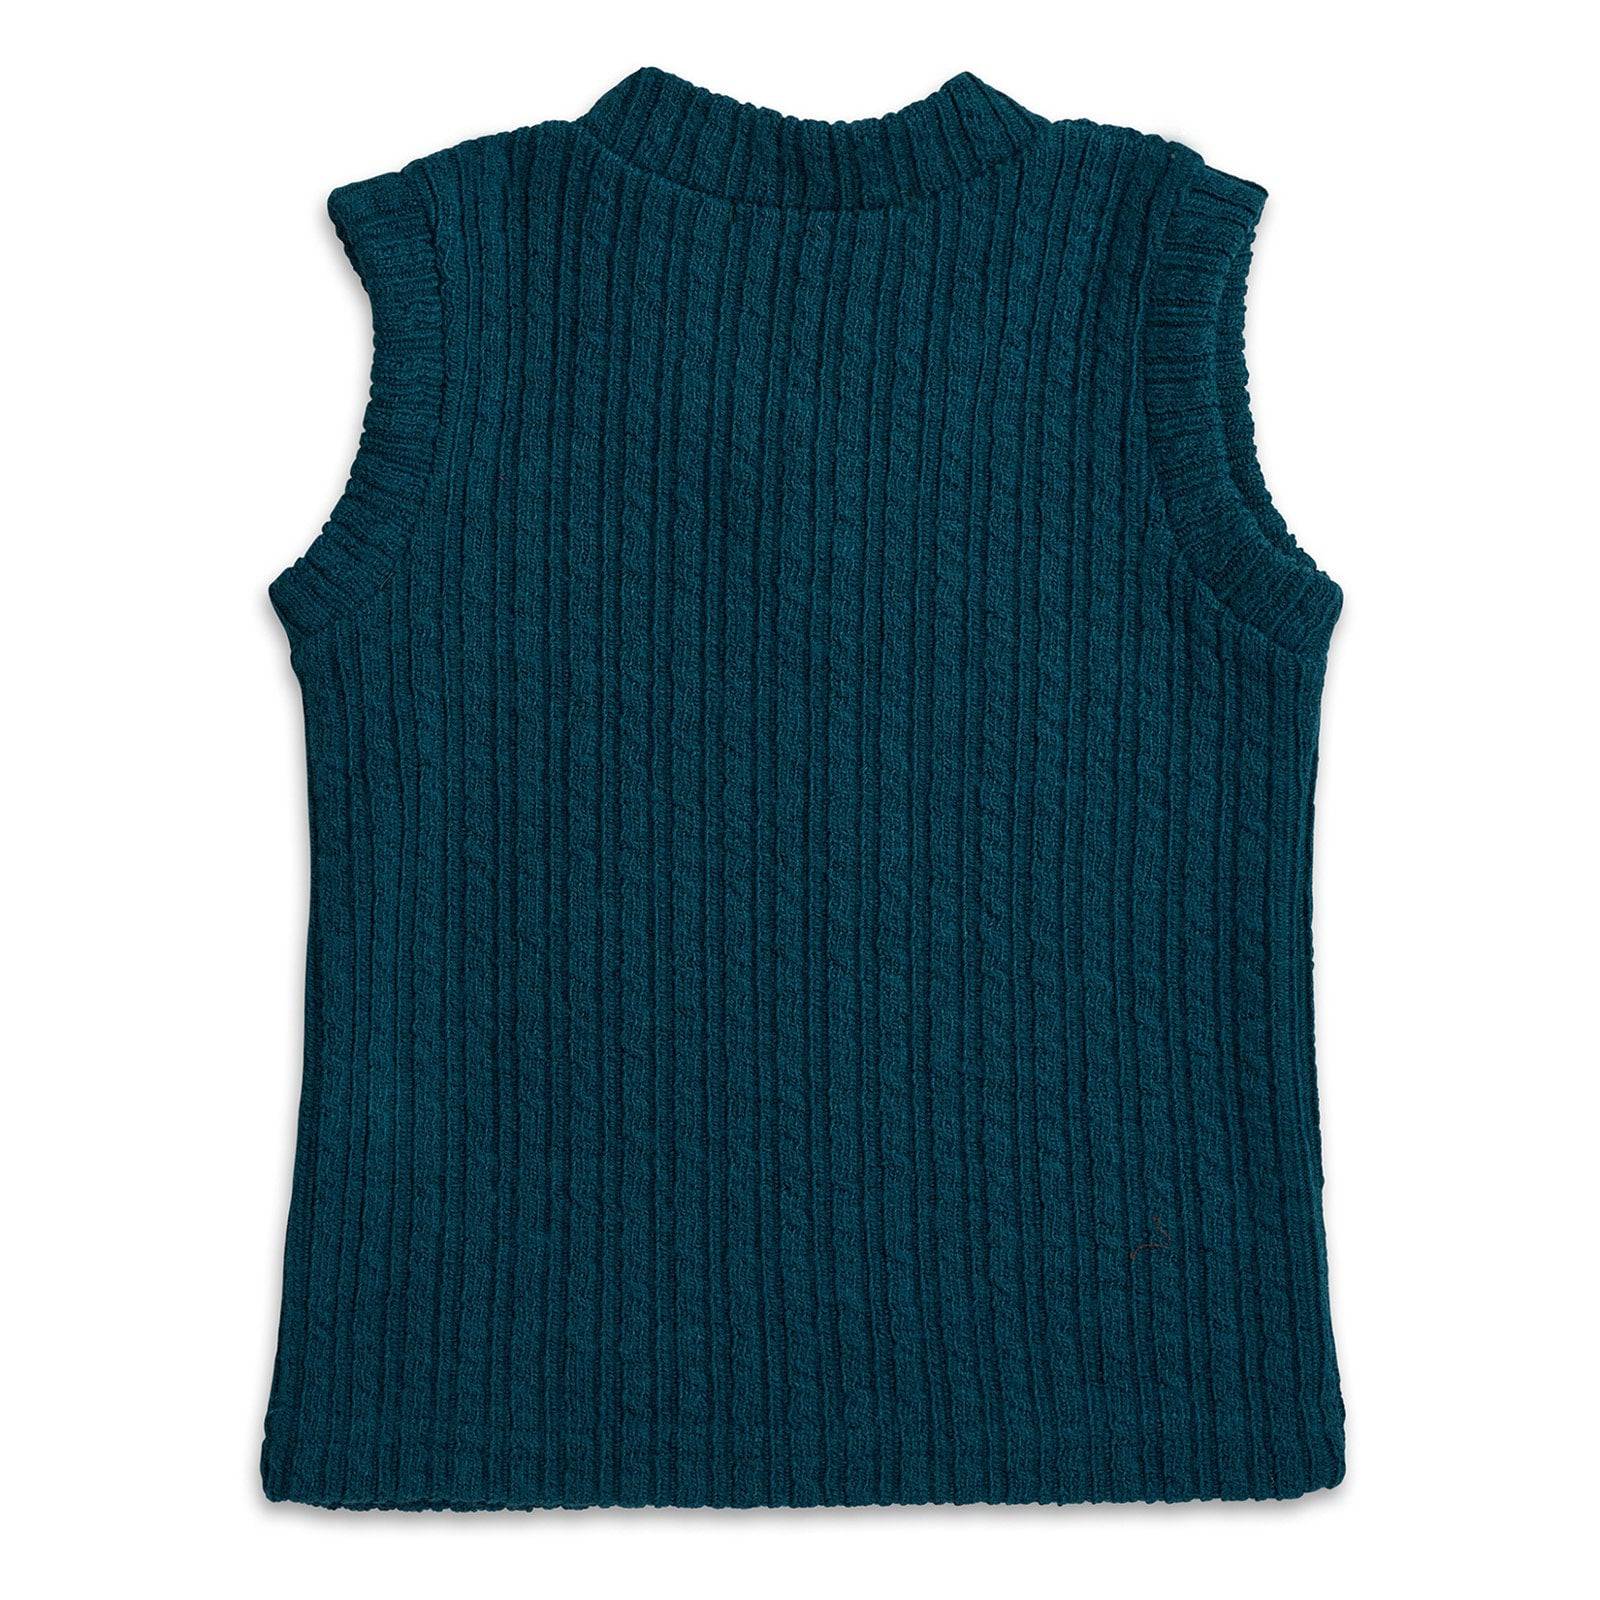 The Green Knitted Vest (boy) - CooCootales